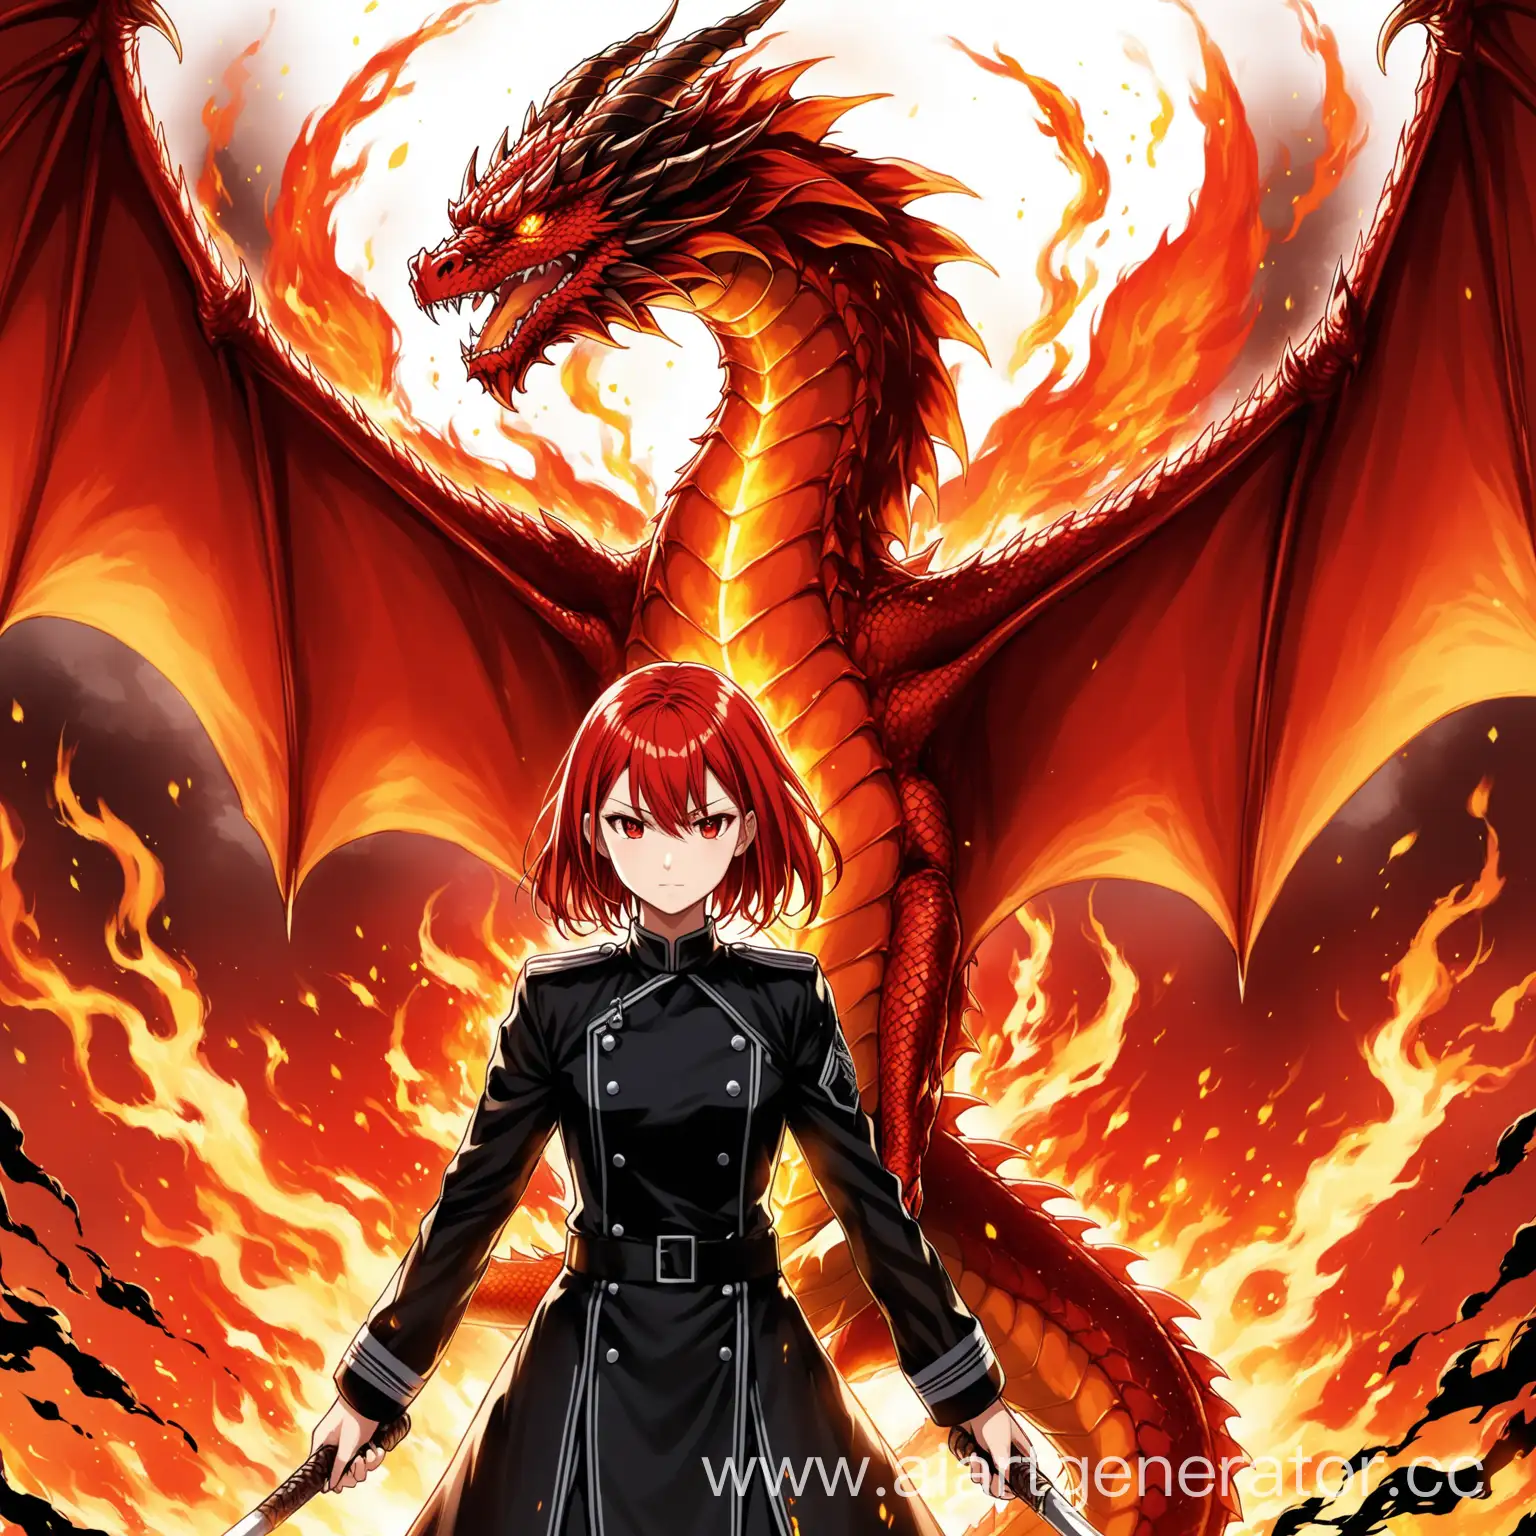 RedHaired-Teen-in-Black-Uniform-with-Fiery-Dragon